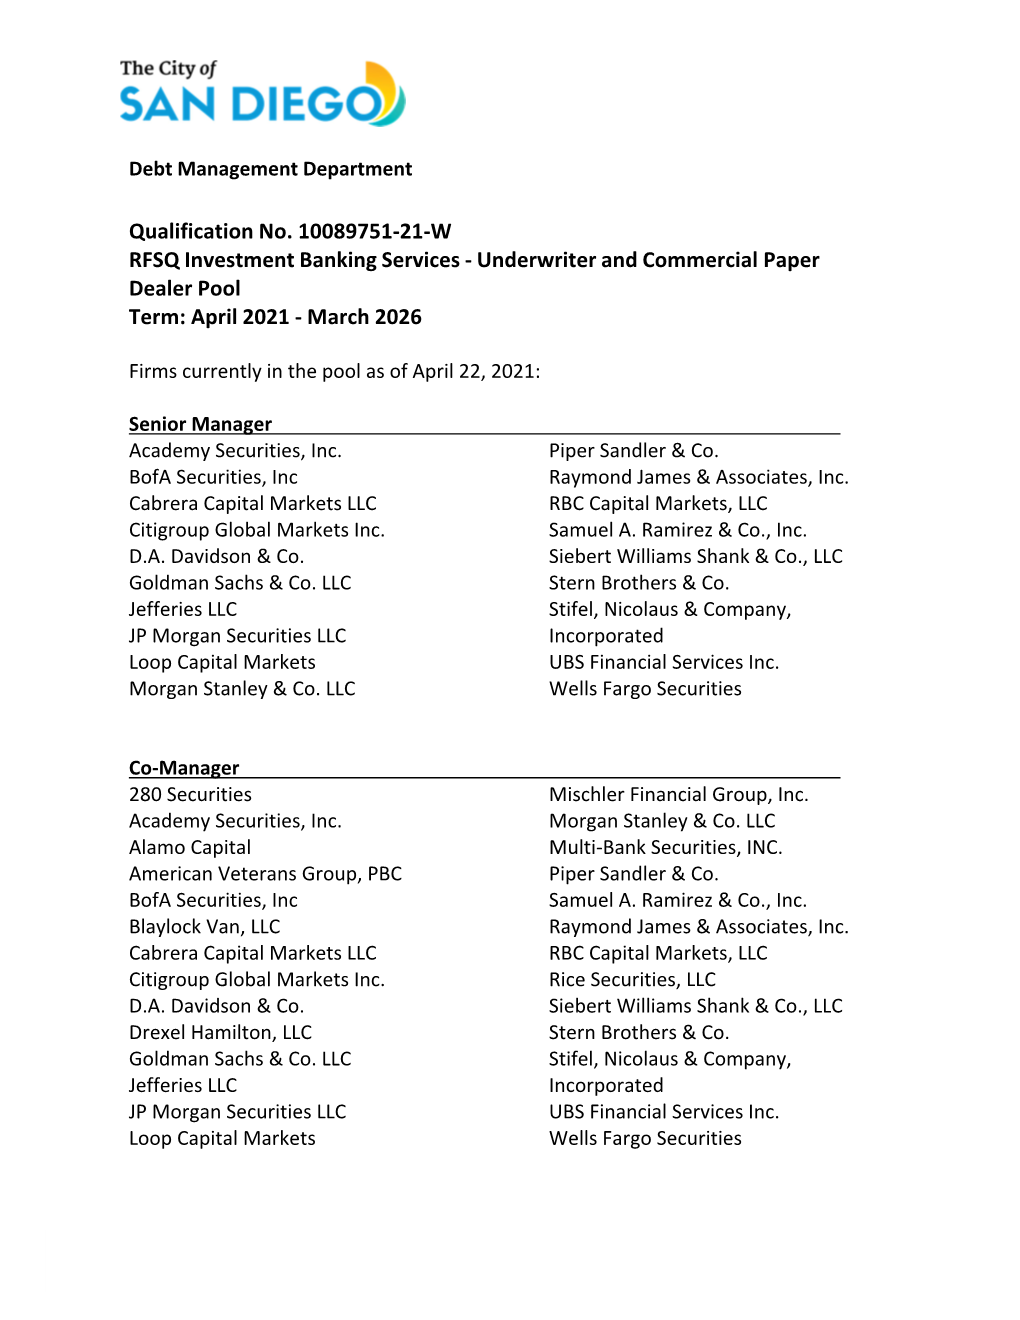 Underwriter and Commercial Paper Dealer Pool Term: April 2021 ‐ March 2026